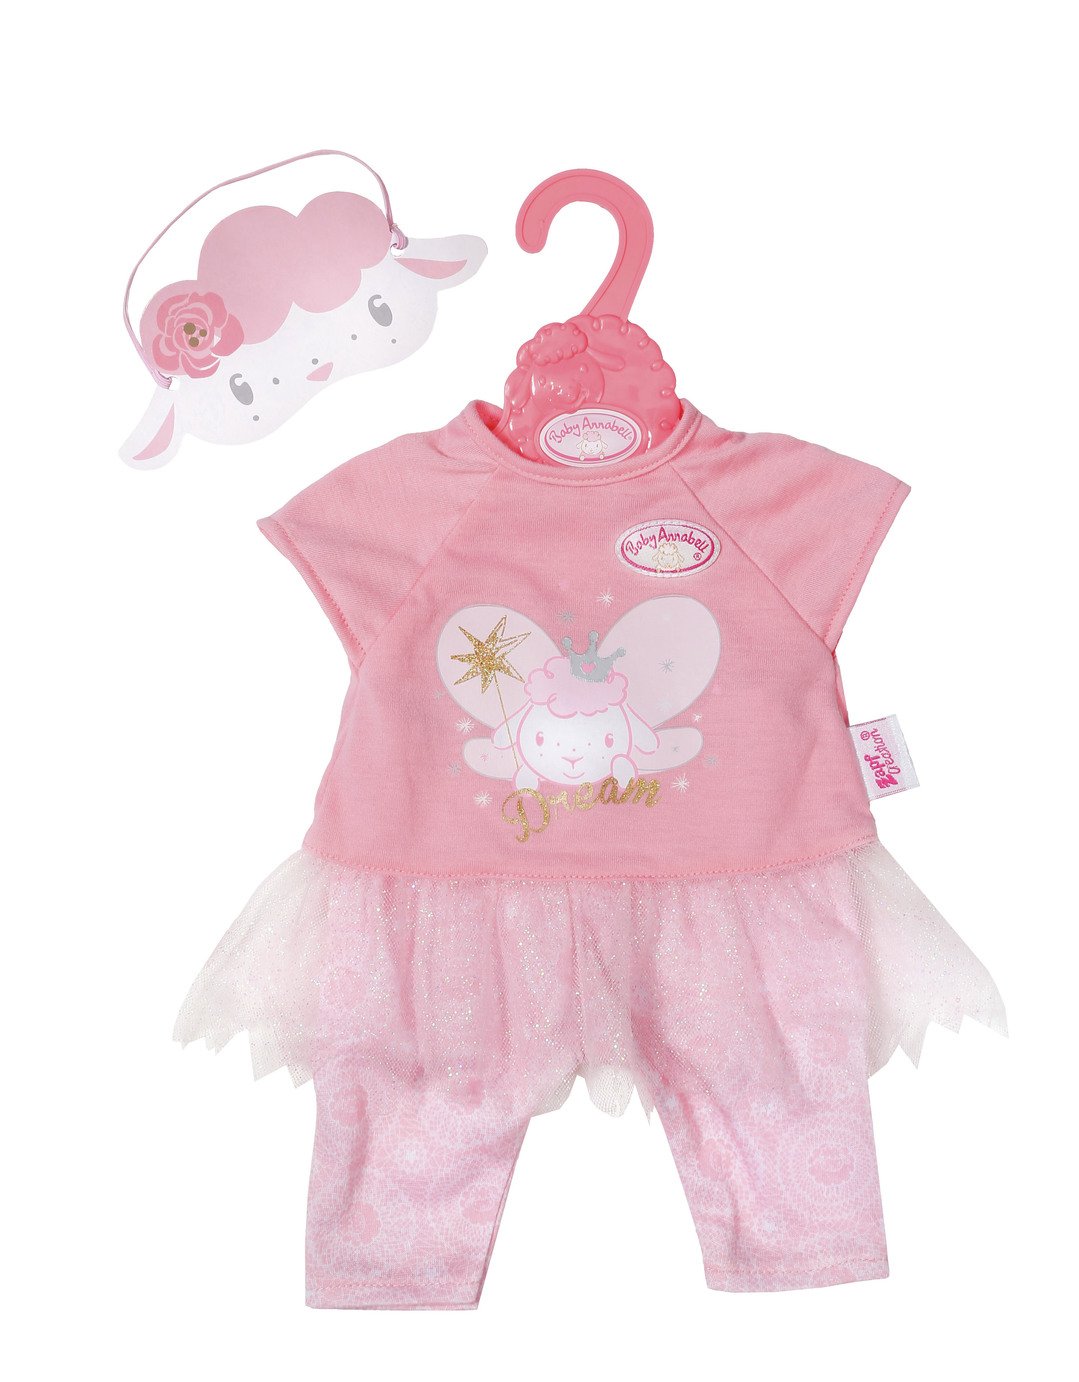 Baby Annabell Sweet Dreams Robe Outfit For 43cm Dolls Zapf Creation 